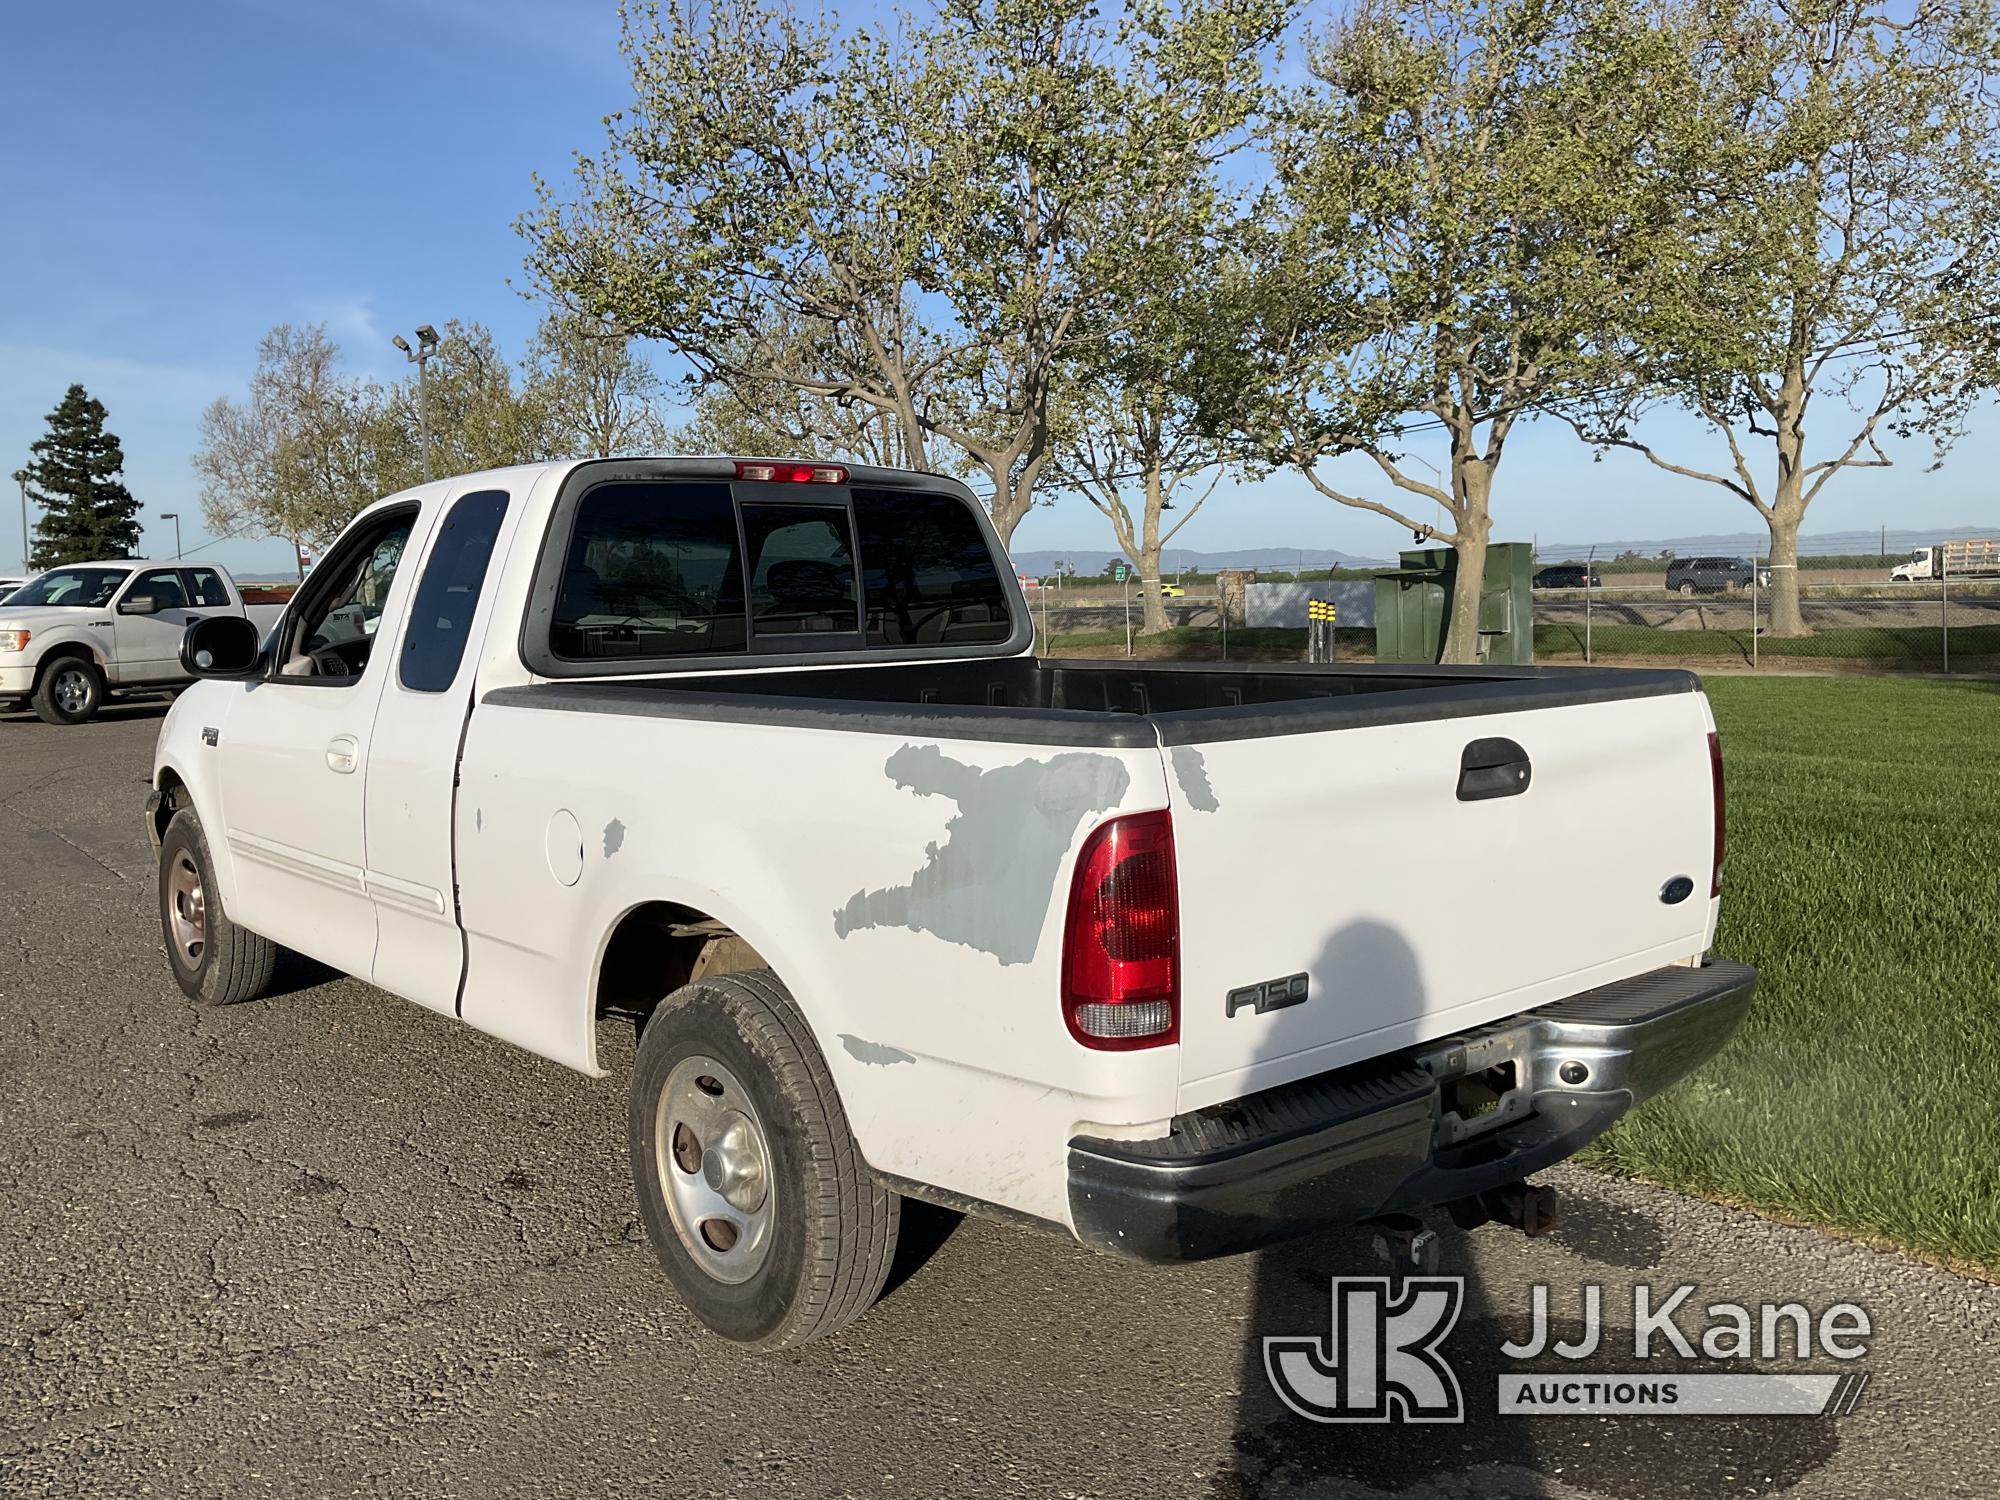 (Dixon, CA) 2002 Ford F150 Extended-Cab Pickup Truck Runs & Moves, Engine Code P0171/P0174 Banks 1-2